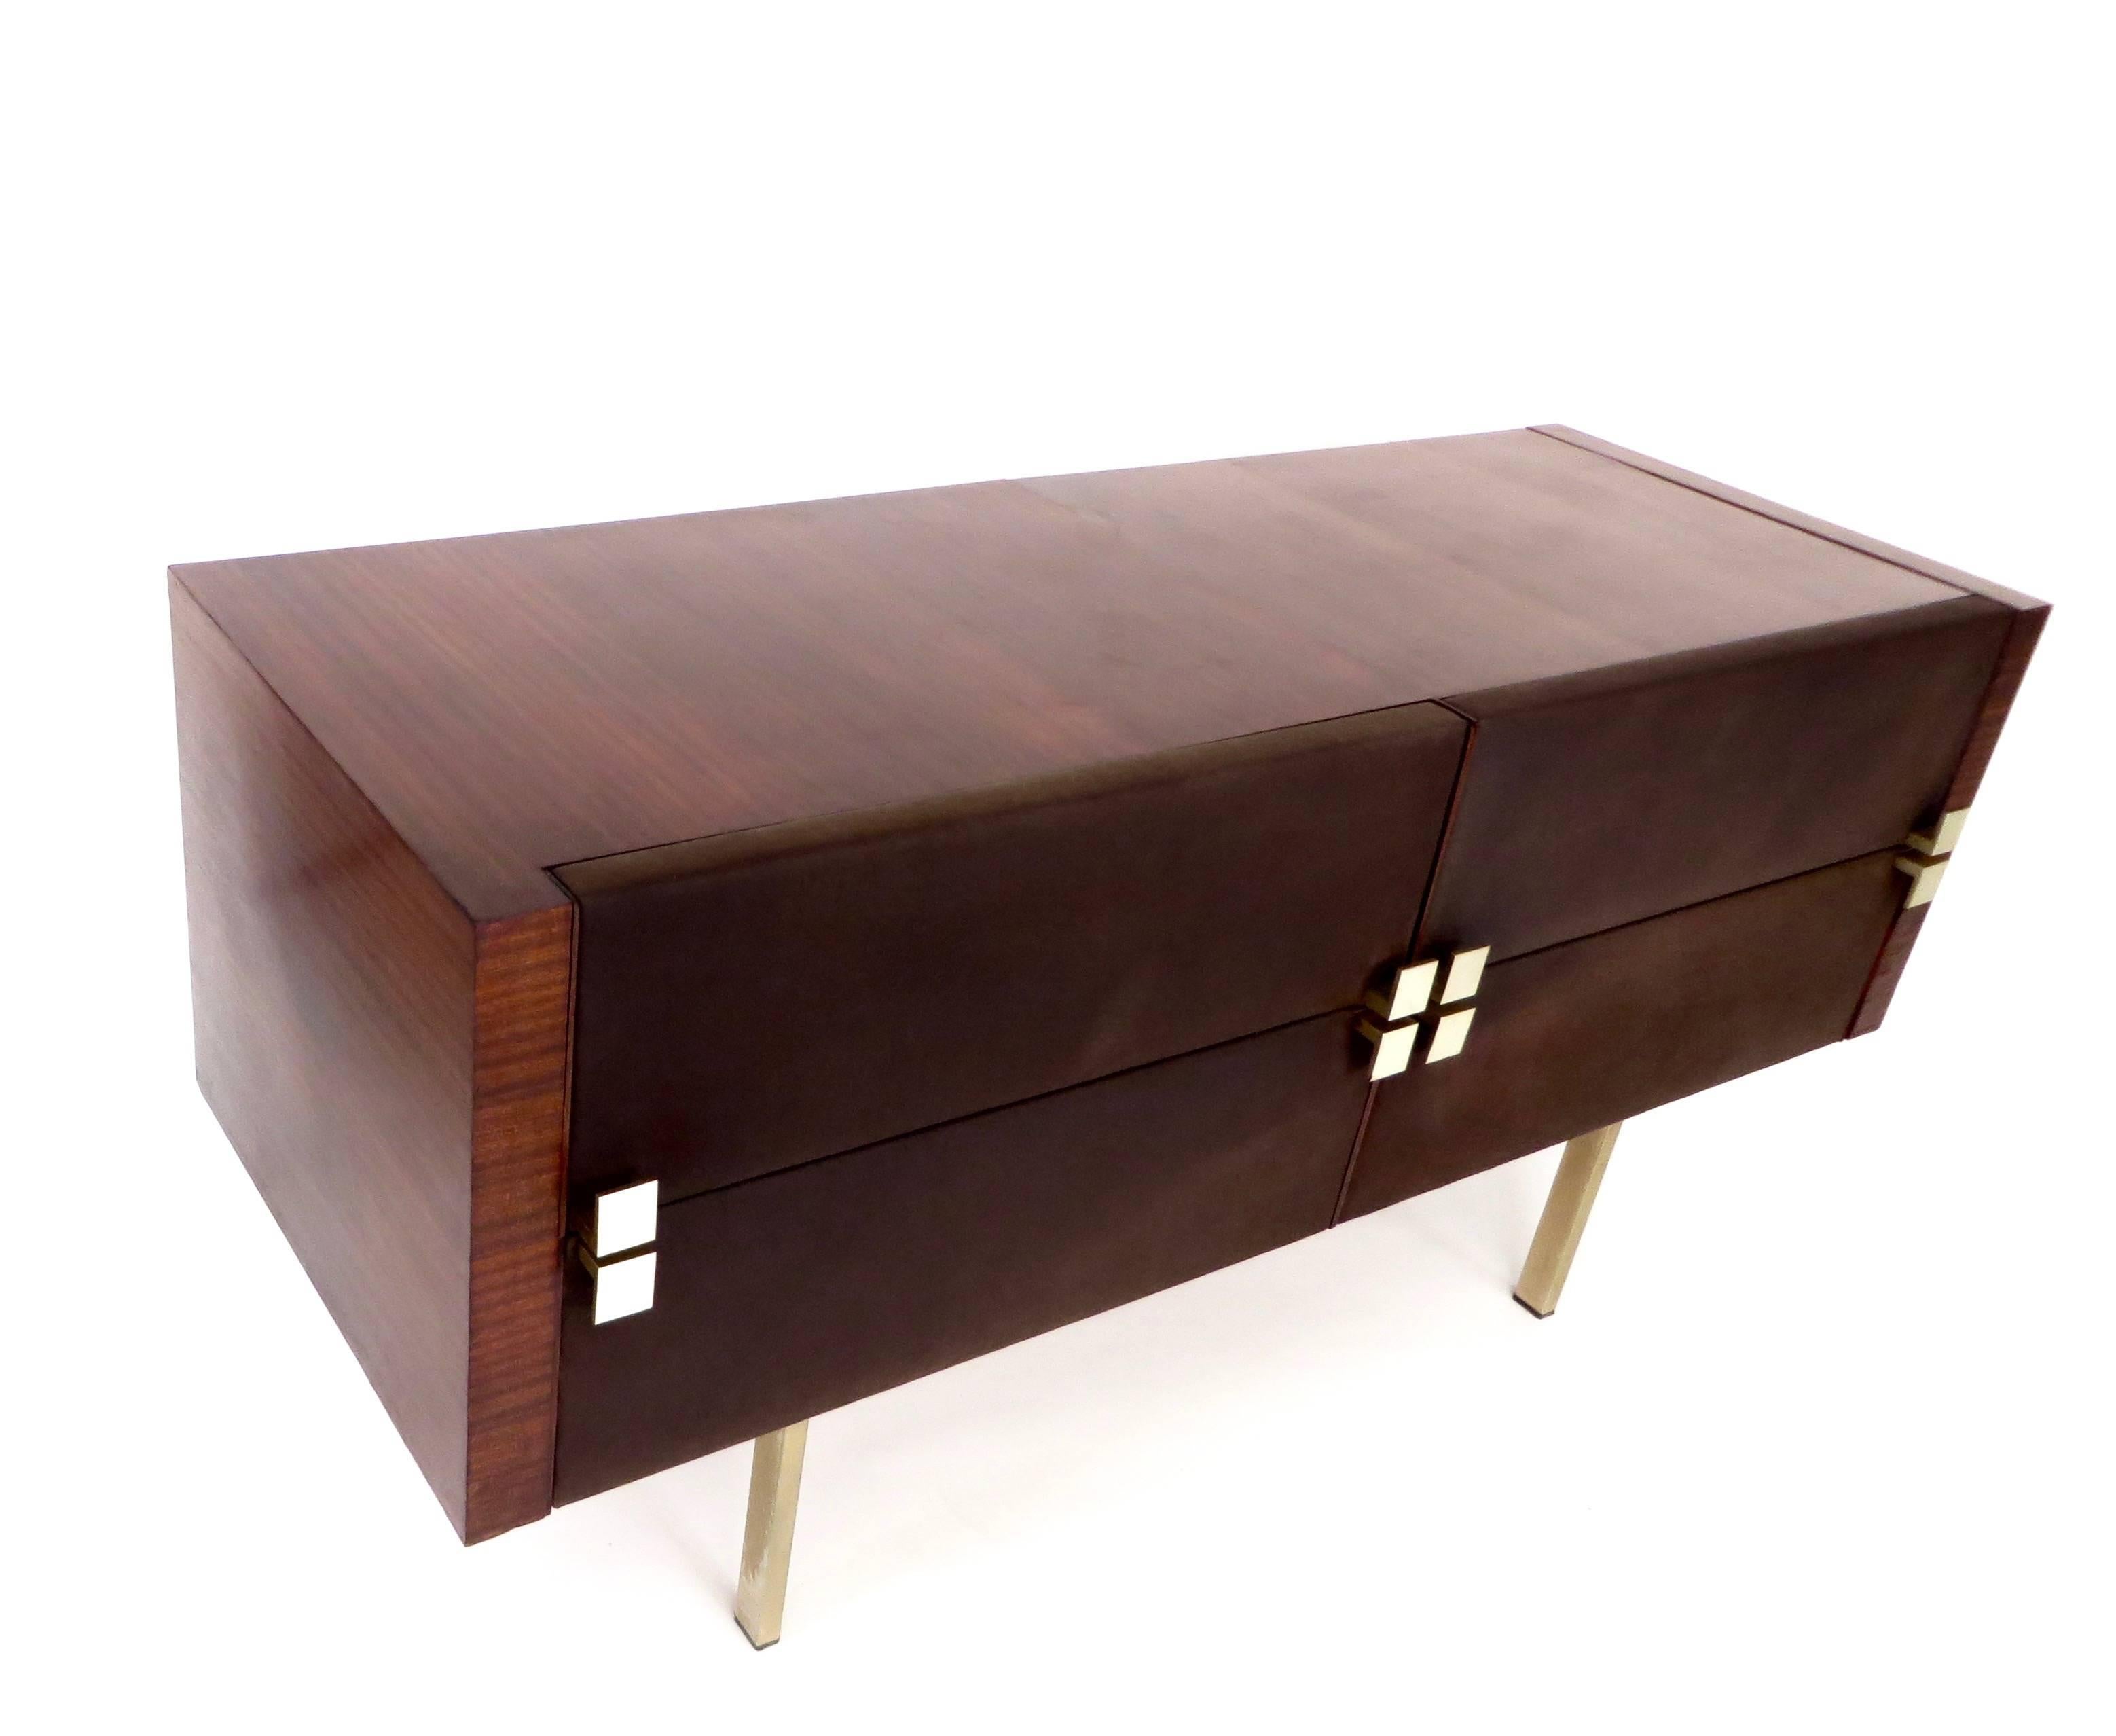 A French modernist cabinet vanity dresser or dressing table by Roger Landault featuring a body in figured rosewood with brass legs and bronze pulls as well as upholstered fronts done in a brown leather.
The cabinet also features three drawers as